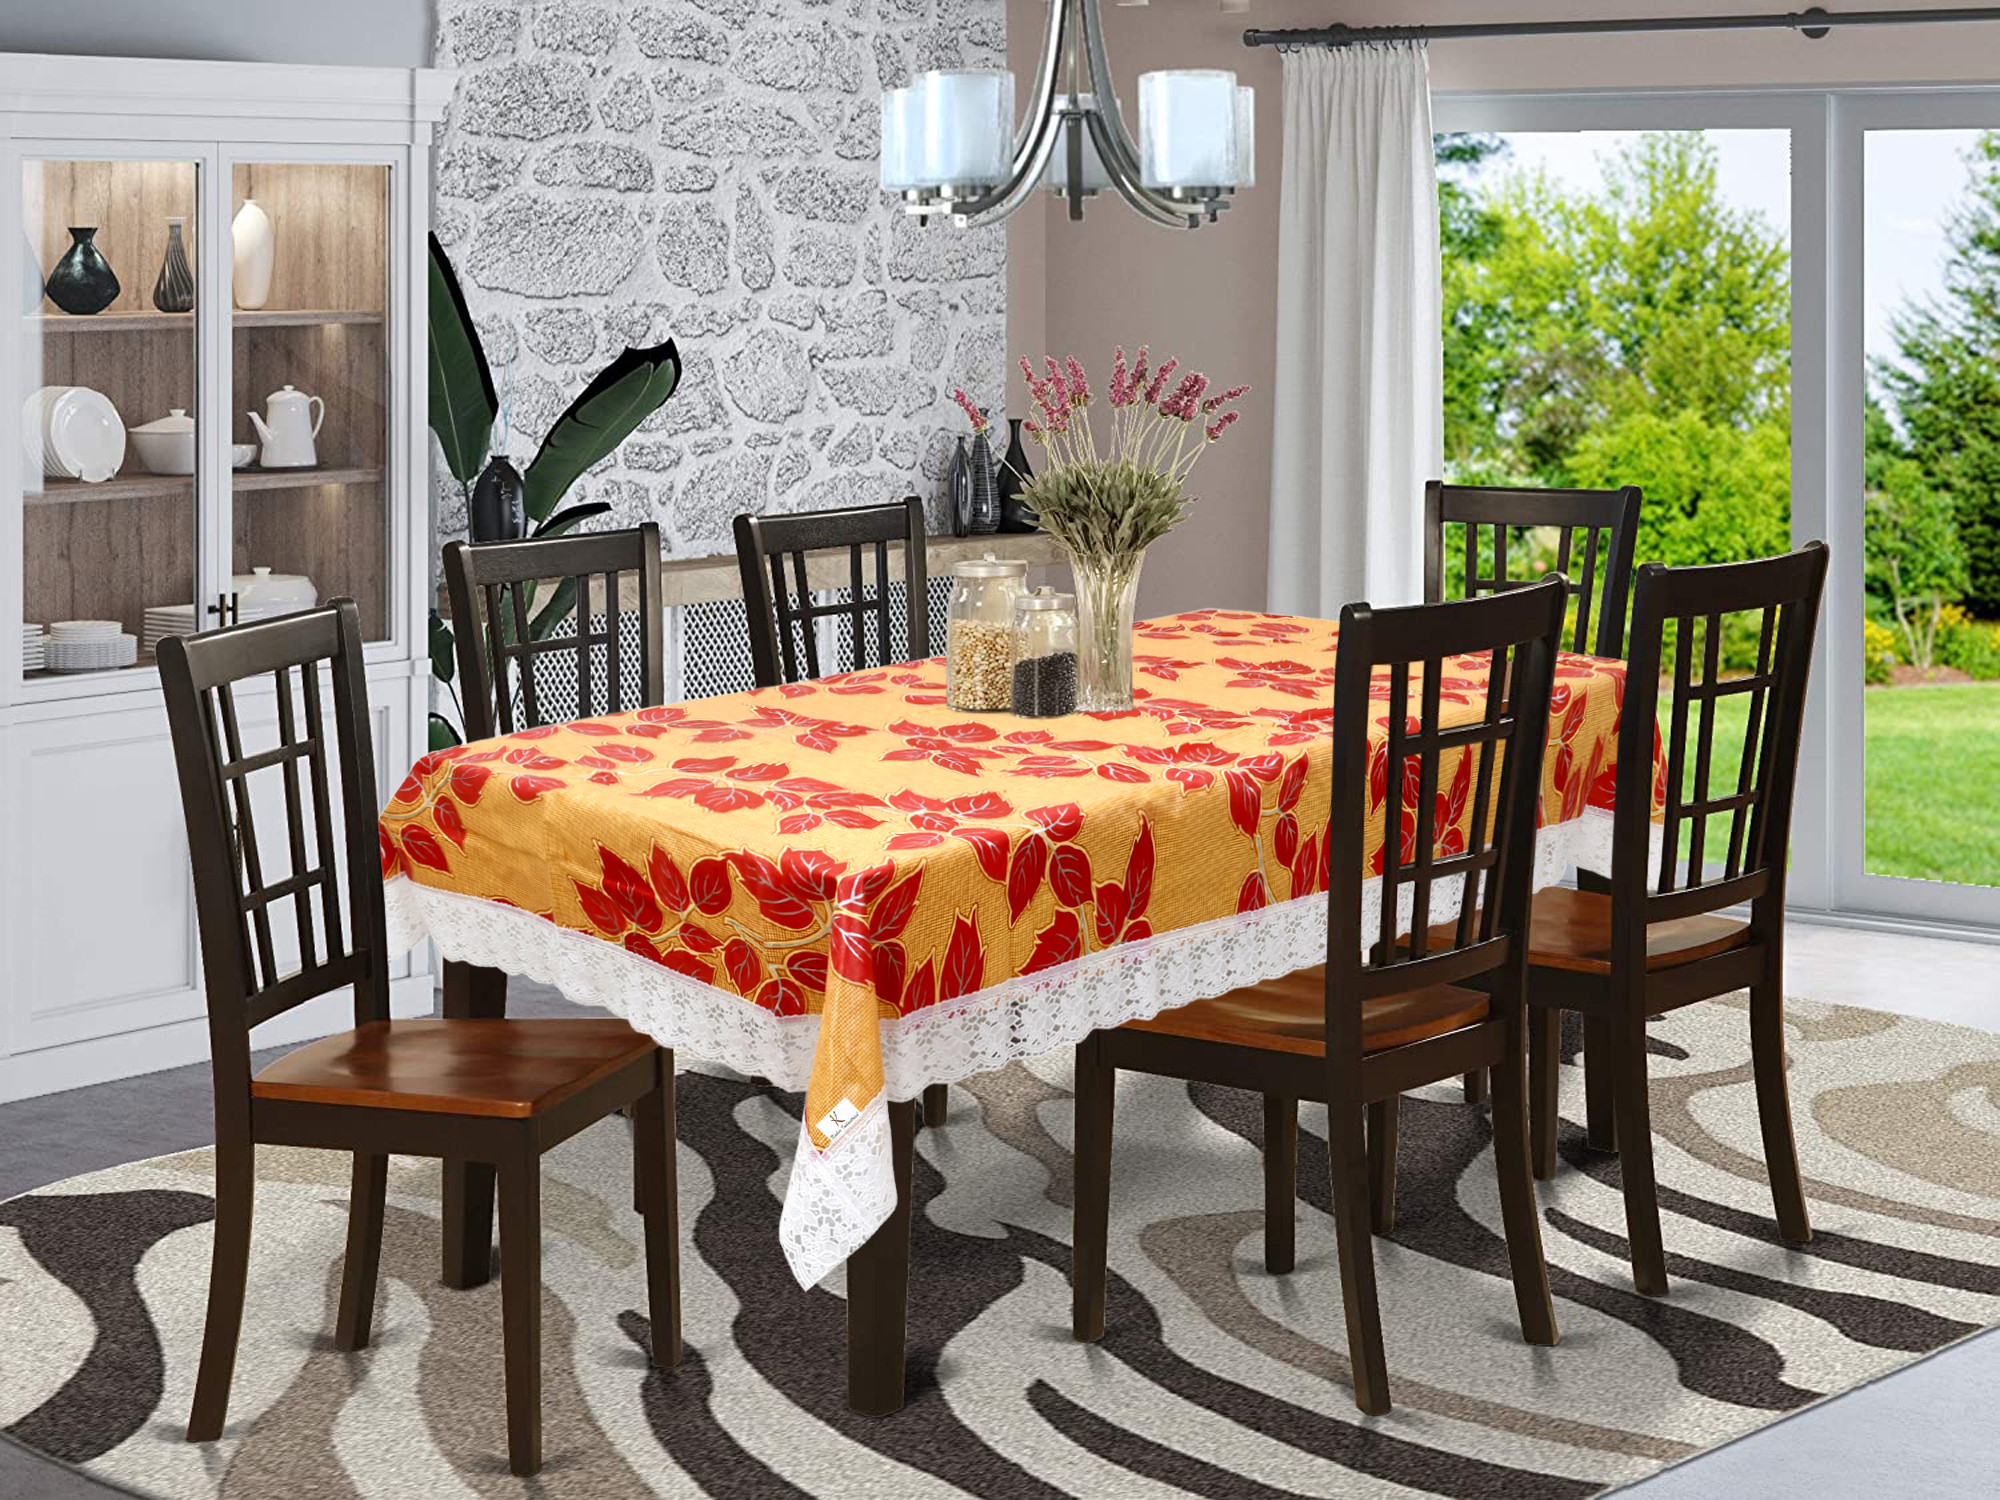 Kuber Industries Leaf Print PVC 6 Seater Dining Table Cover 60